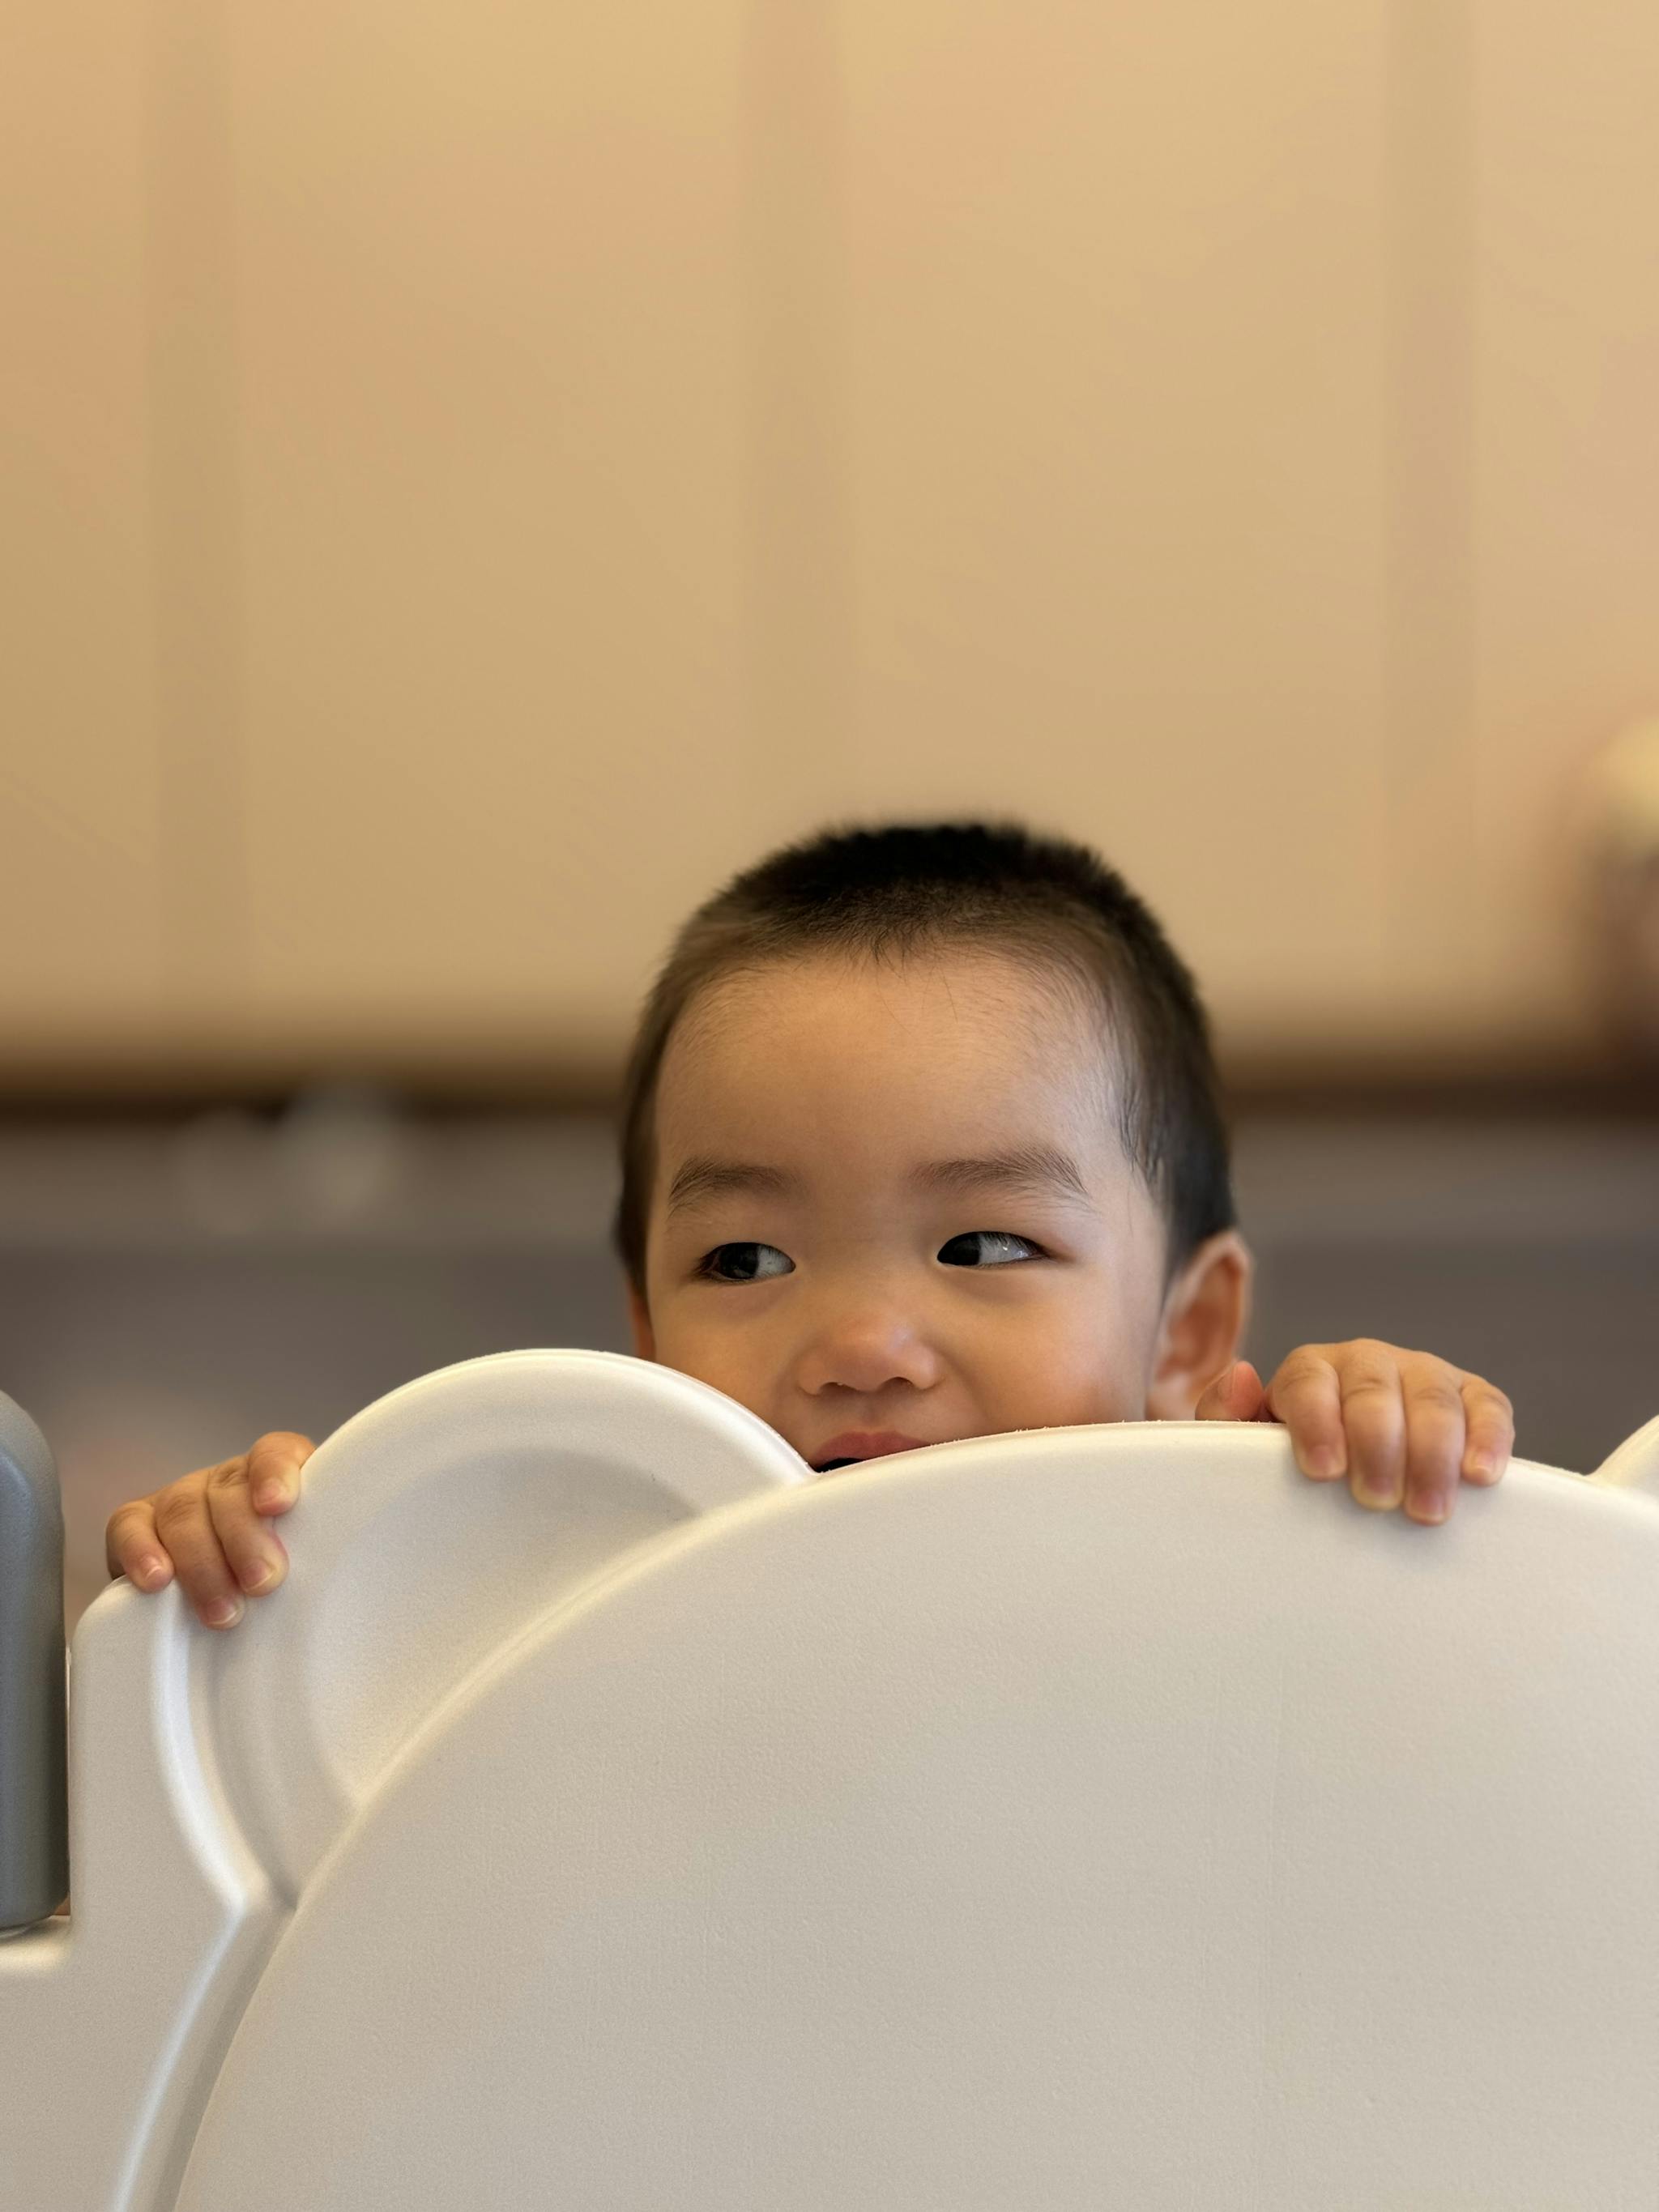 A young child peeks over the top of a white chair, only their head visible